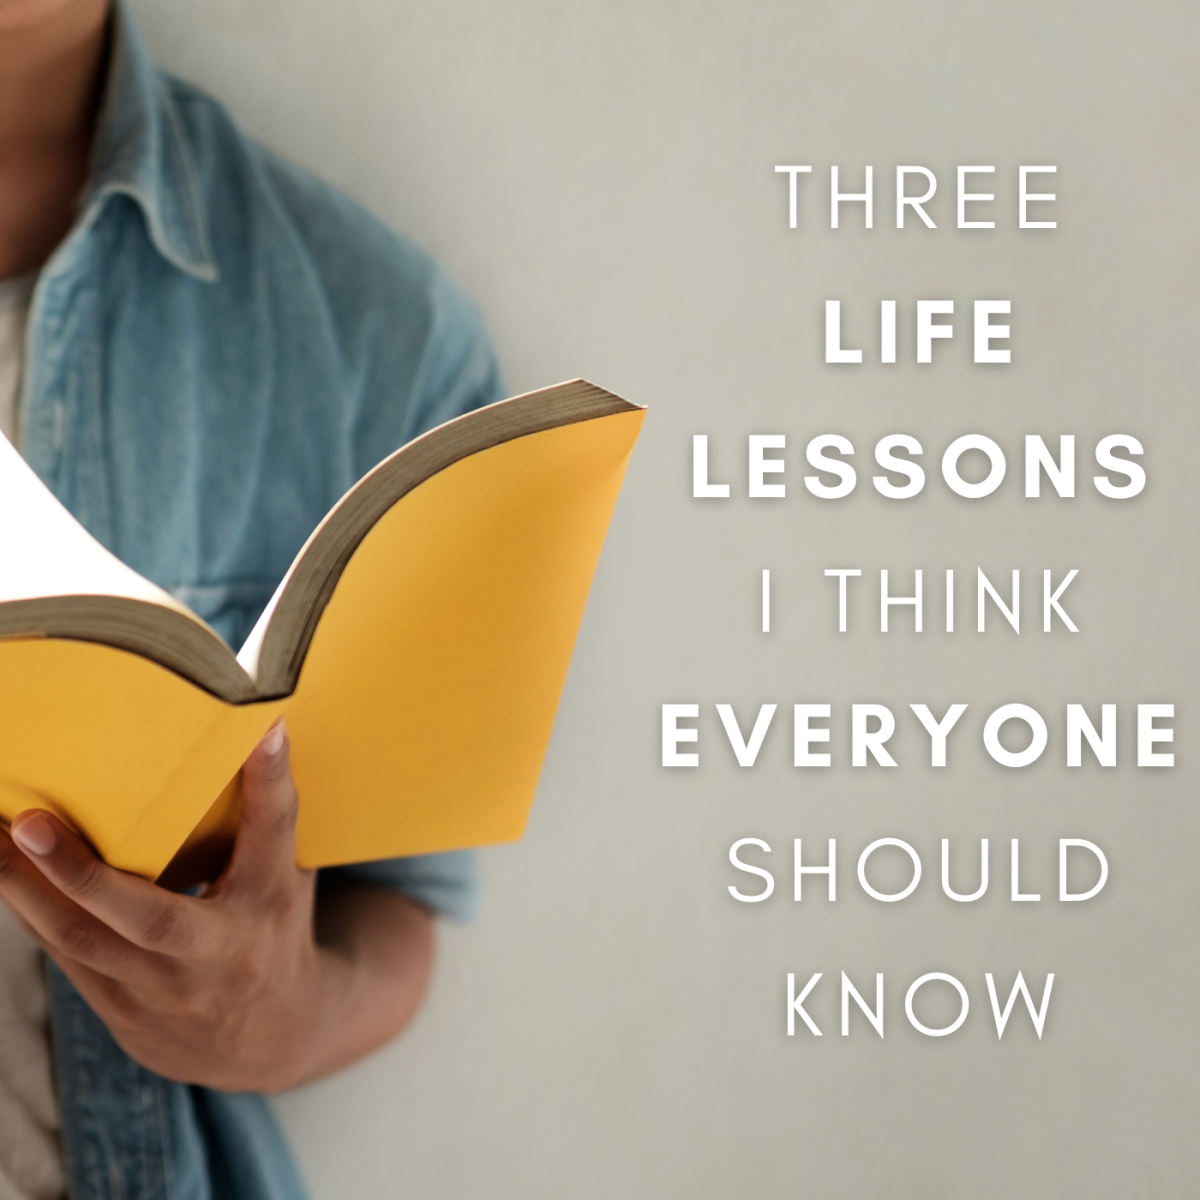 Three important life lessons everyone should know.